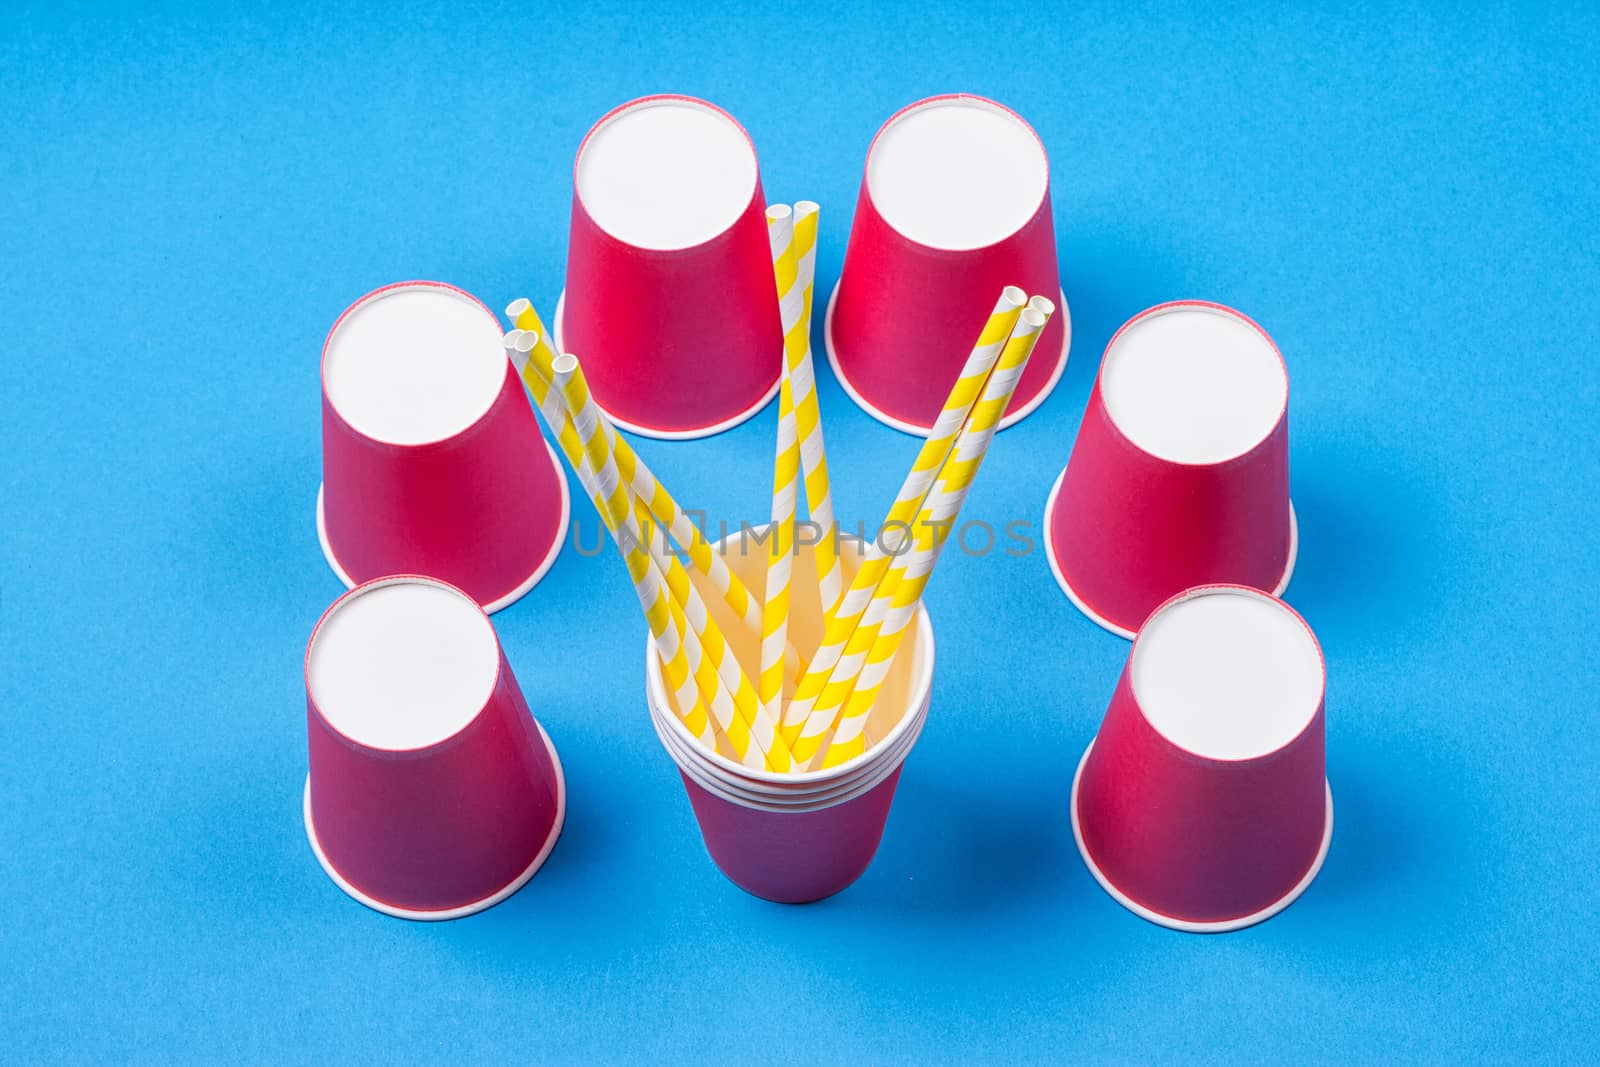 a bundle of multi-colored drinking straws in a paper Cup by victosha